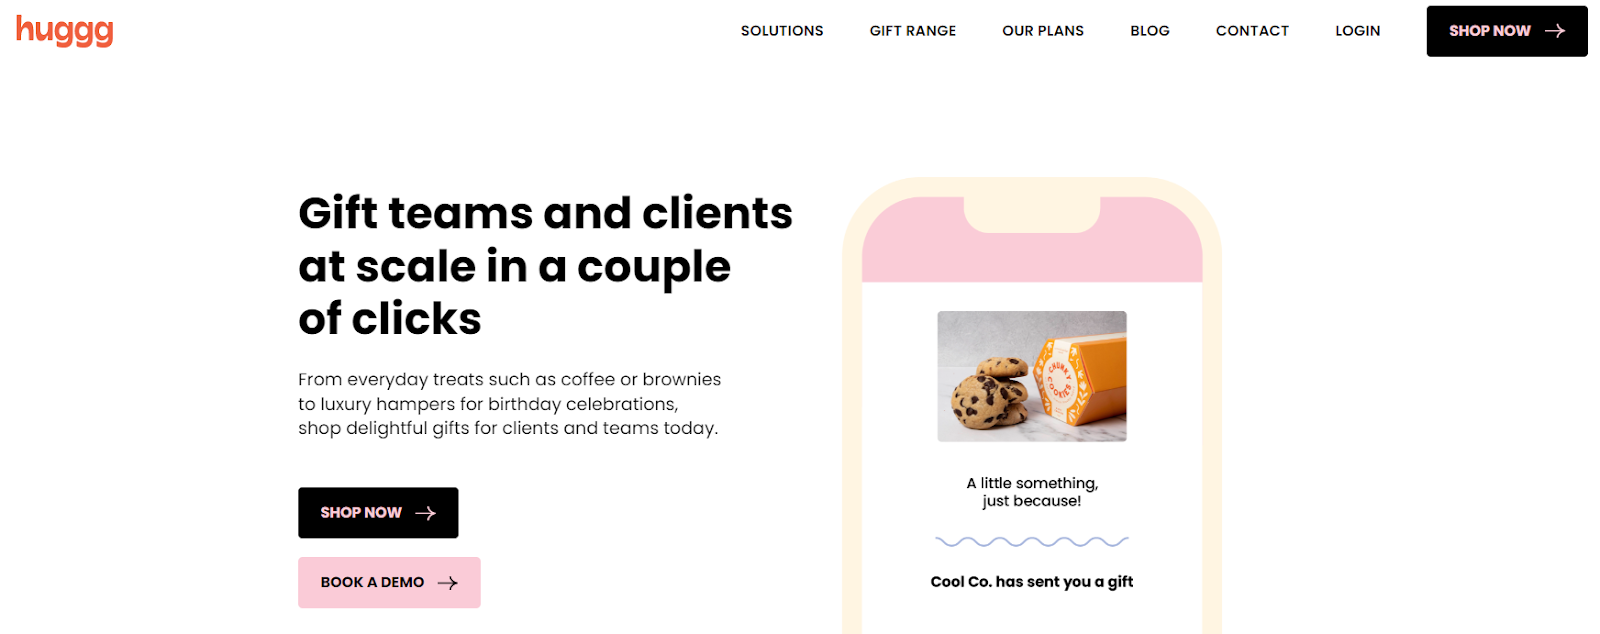 Sales software Huggg makes it easy to reward SDRs and build relationships with prospects. This is a screenshot of the Huggg homepage, and the title reads gift teams and clients at scale in a couple of clicks.